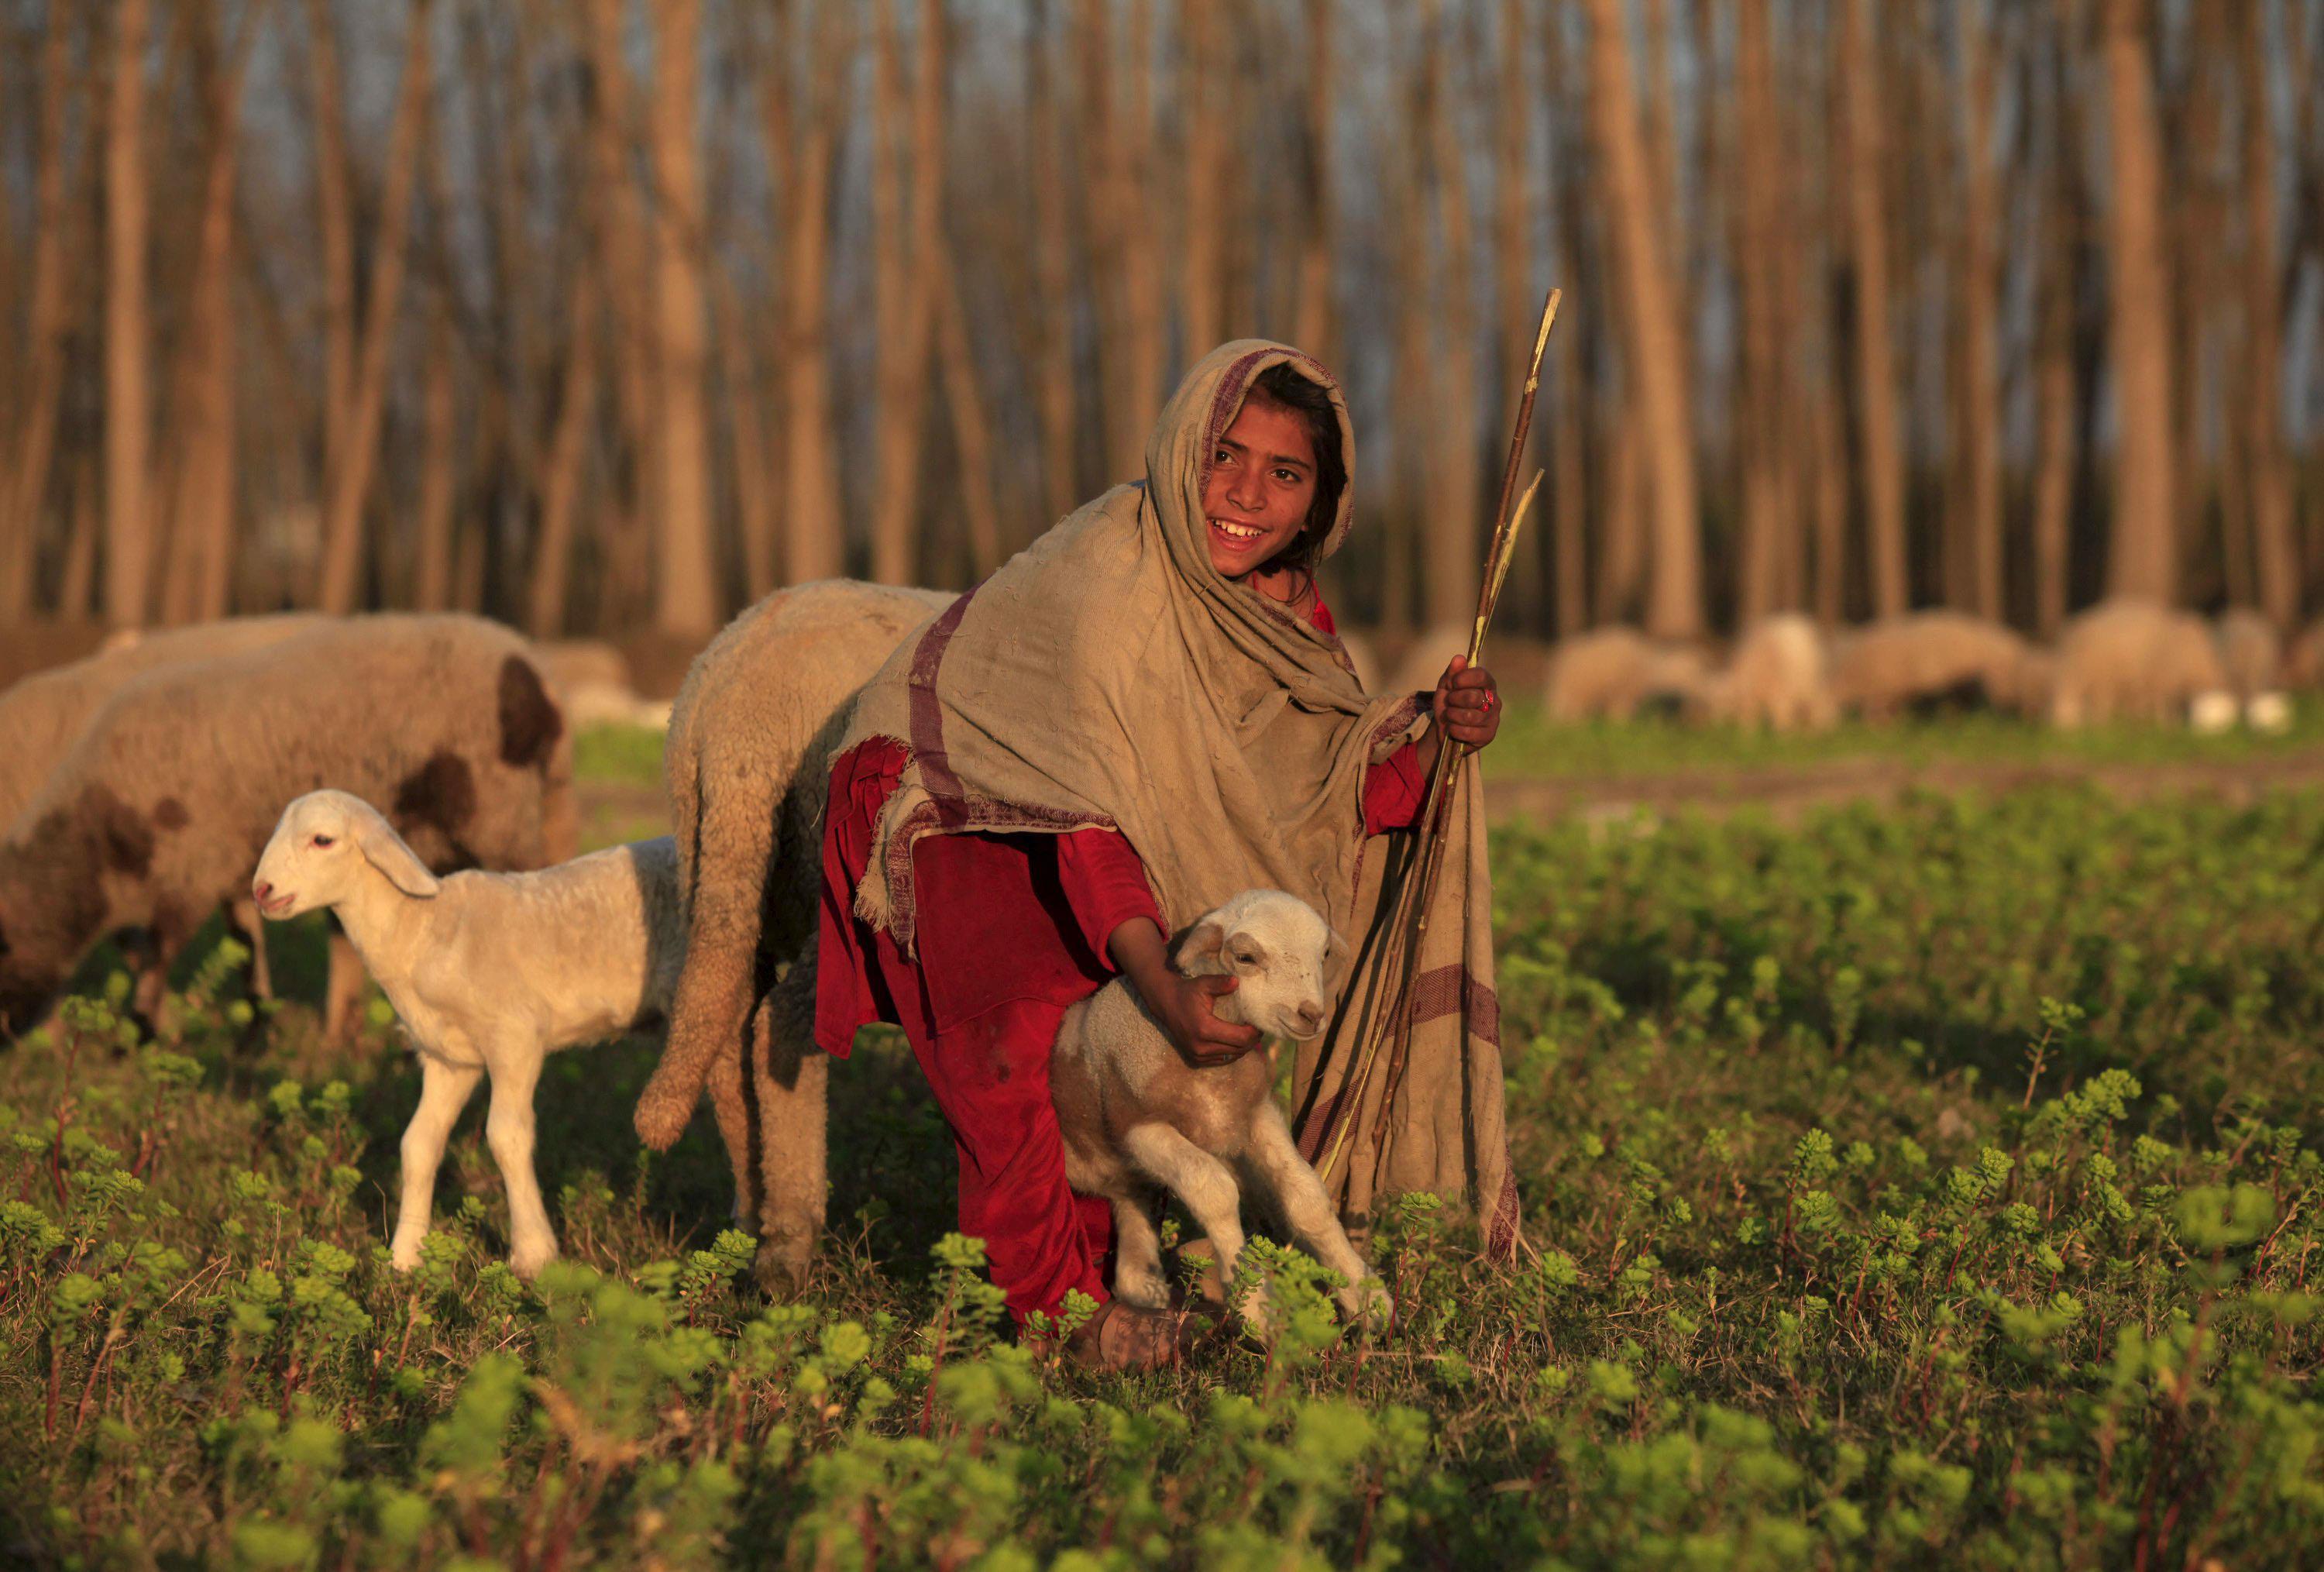 A girl reacts while holding a sheep at a field in Nowshera, Pakistan